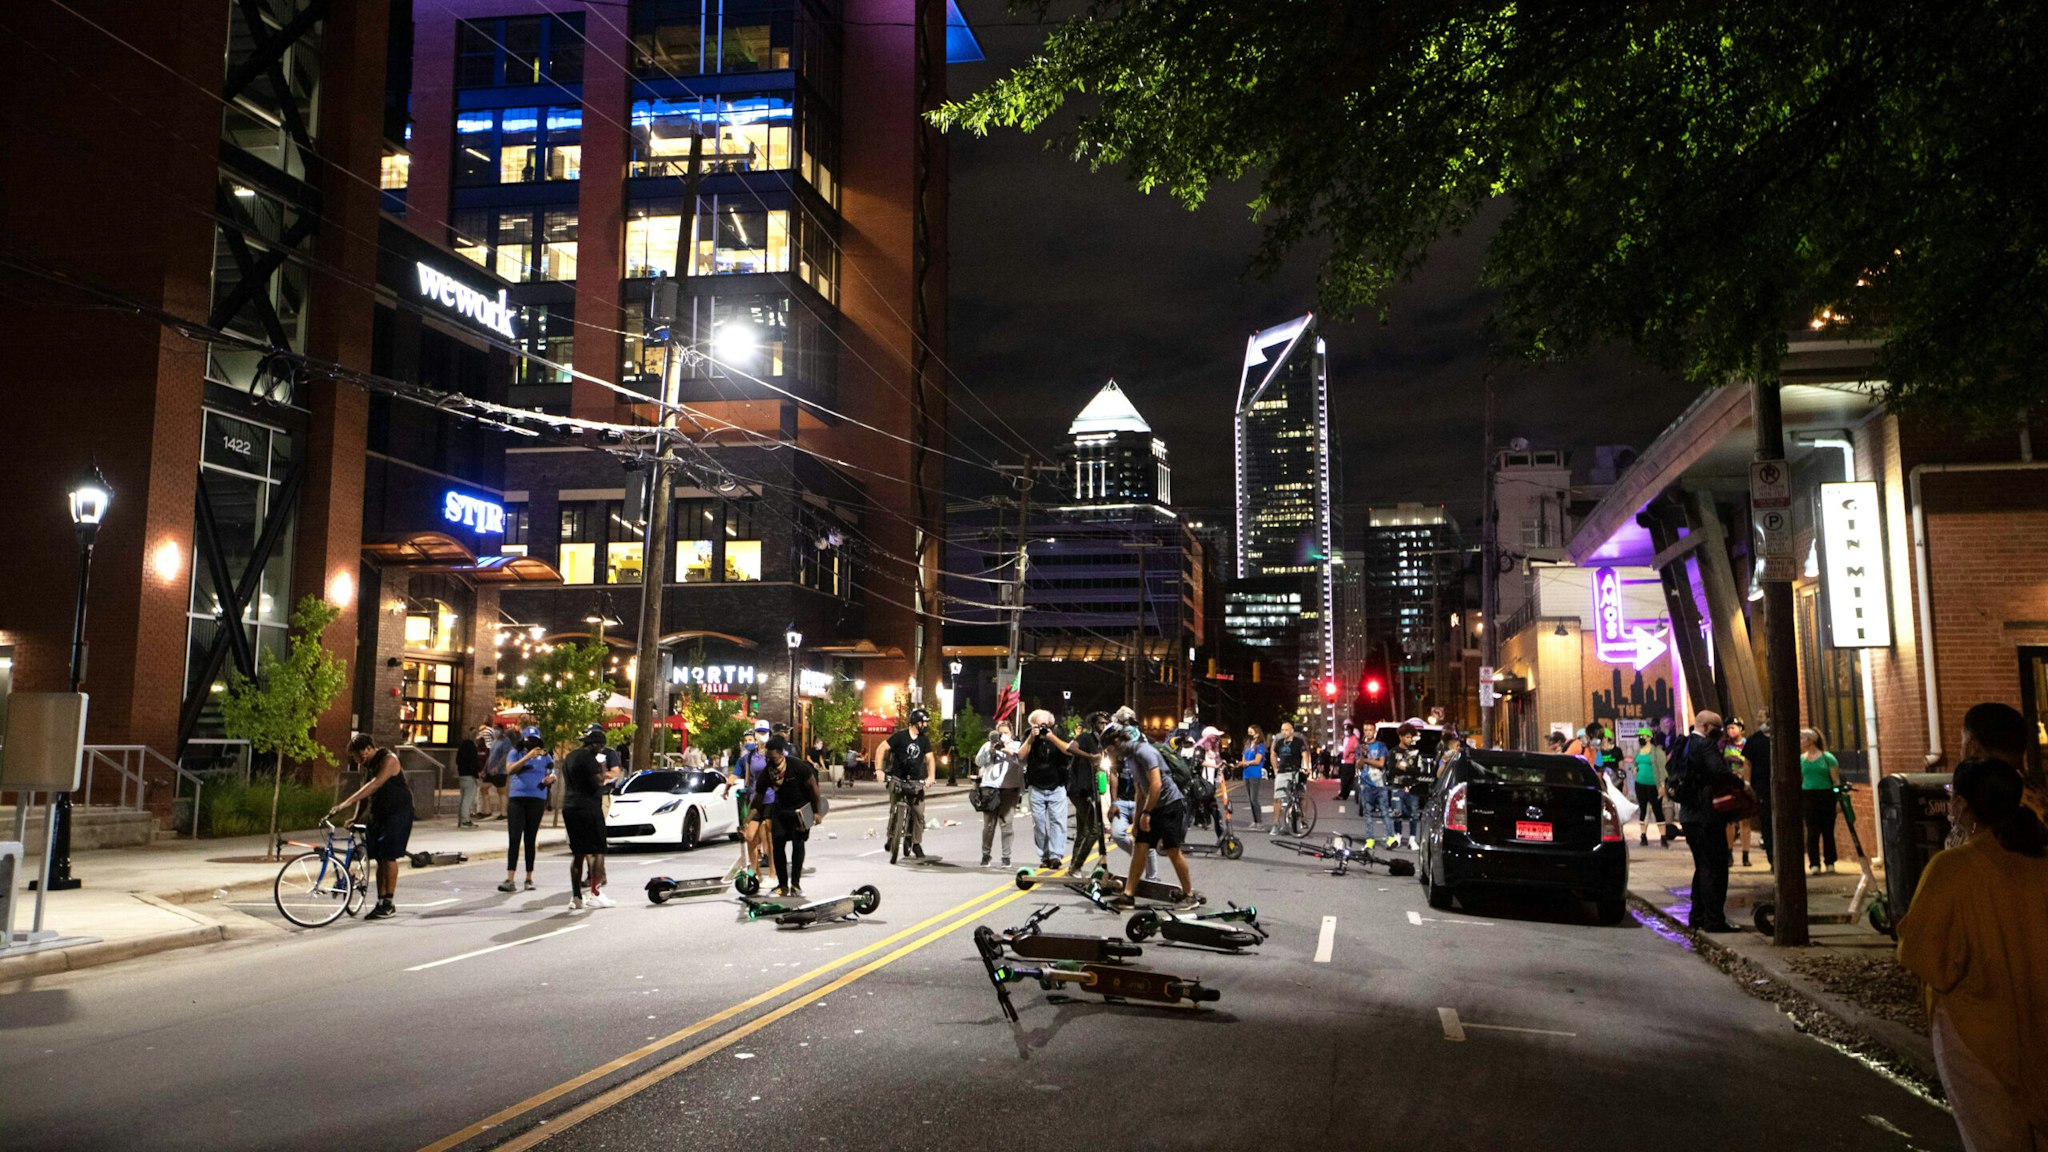 Protestors scatter e-scooters in the road in front of a complex people were eating dinner in Charlotte's South End neighborhood during a protest organized by Charlotte Uprising, in uptown Charlotte near the site of the 2020 Republican National Convention in North Carolina on August 22, 2020. - Delegates are holding private meetings inside the convention center ahead of the official start of the paired down convention on August 24.